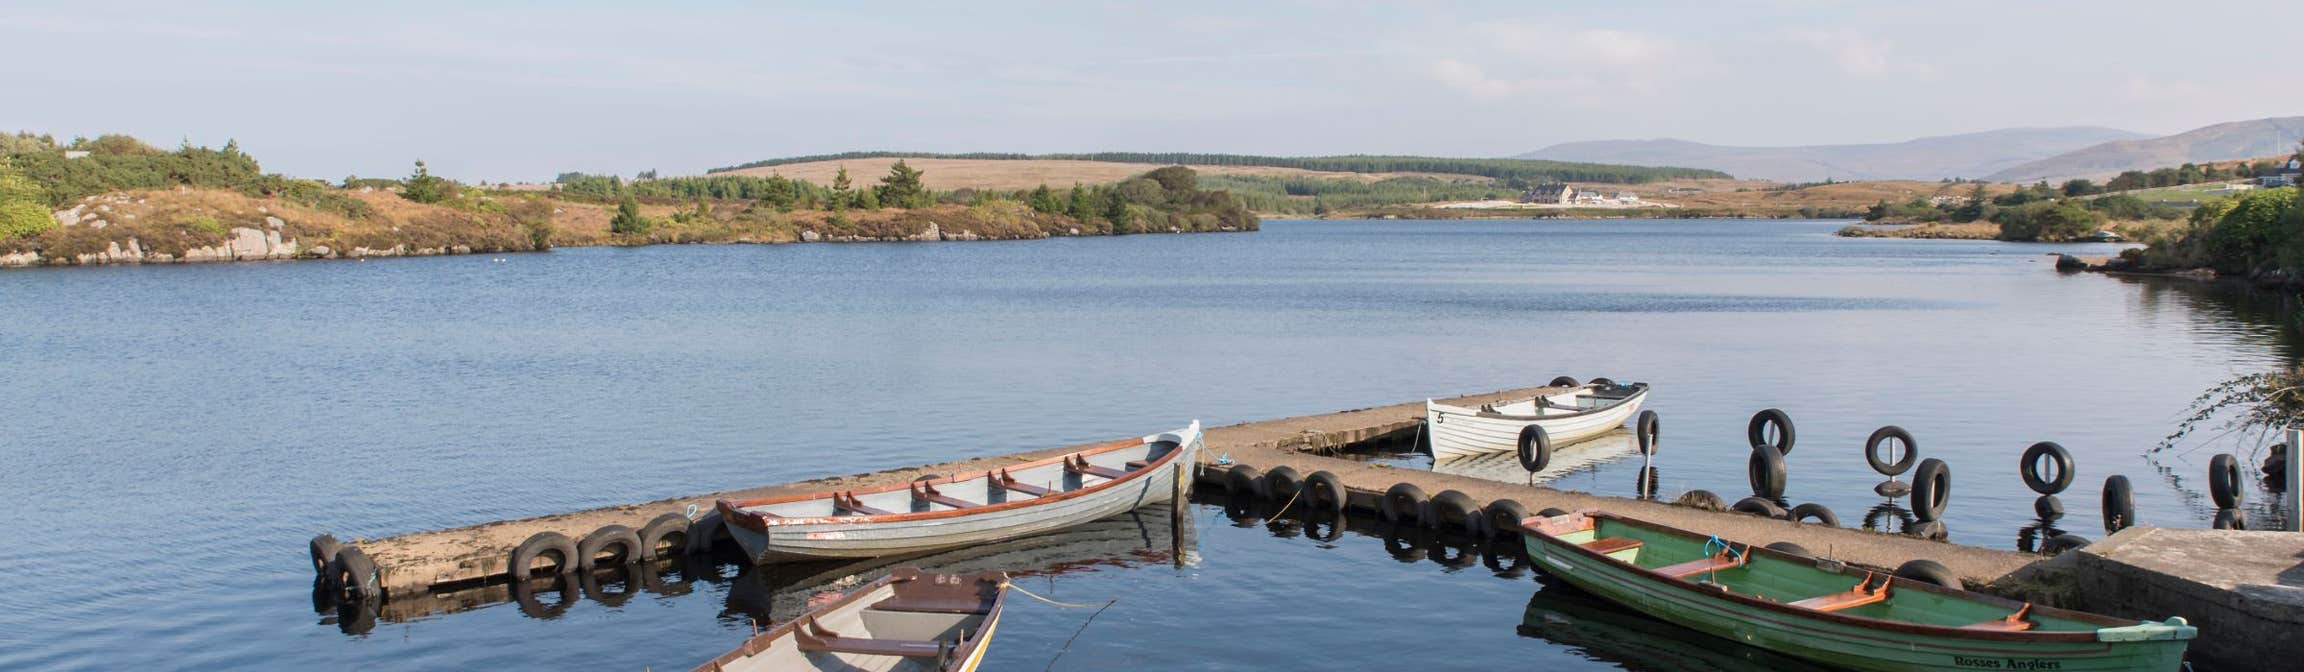 4 boats on a lake in Dungloe in County Donegal